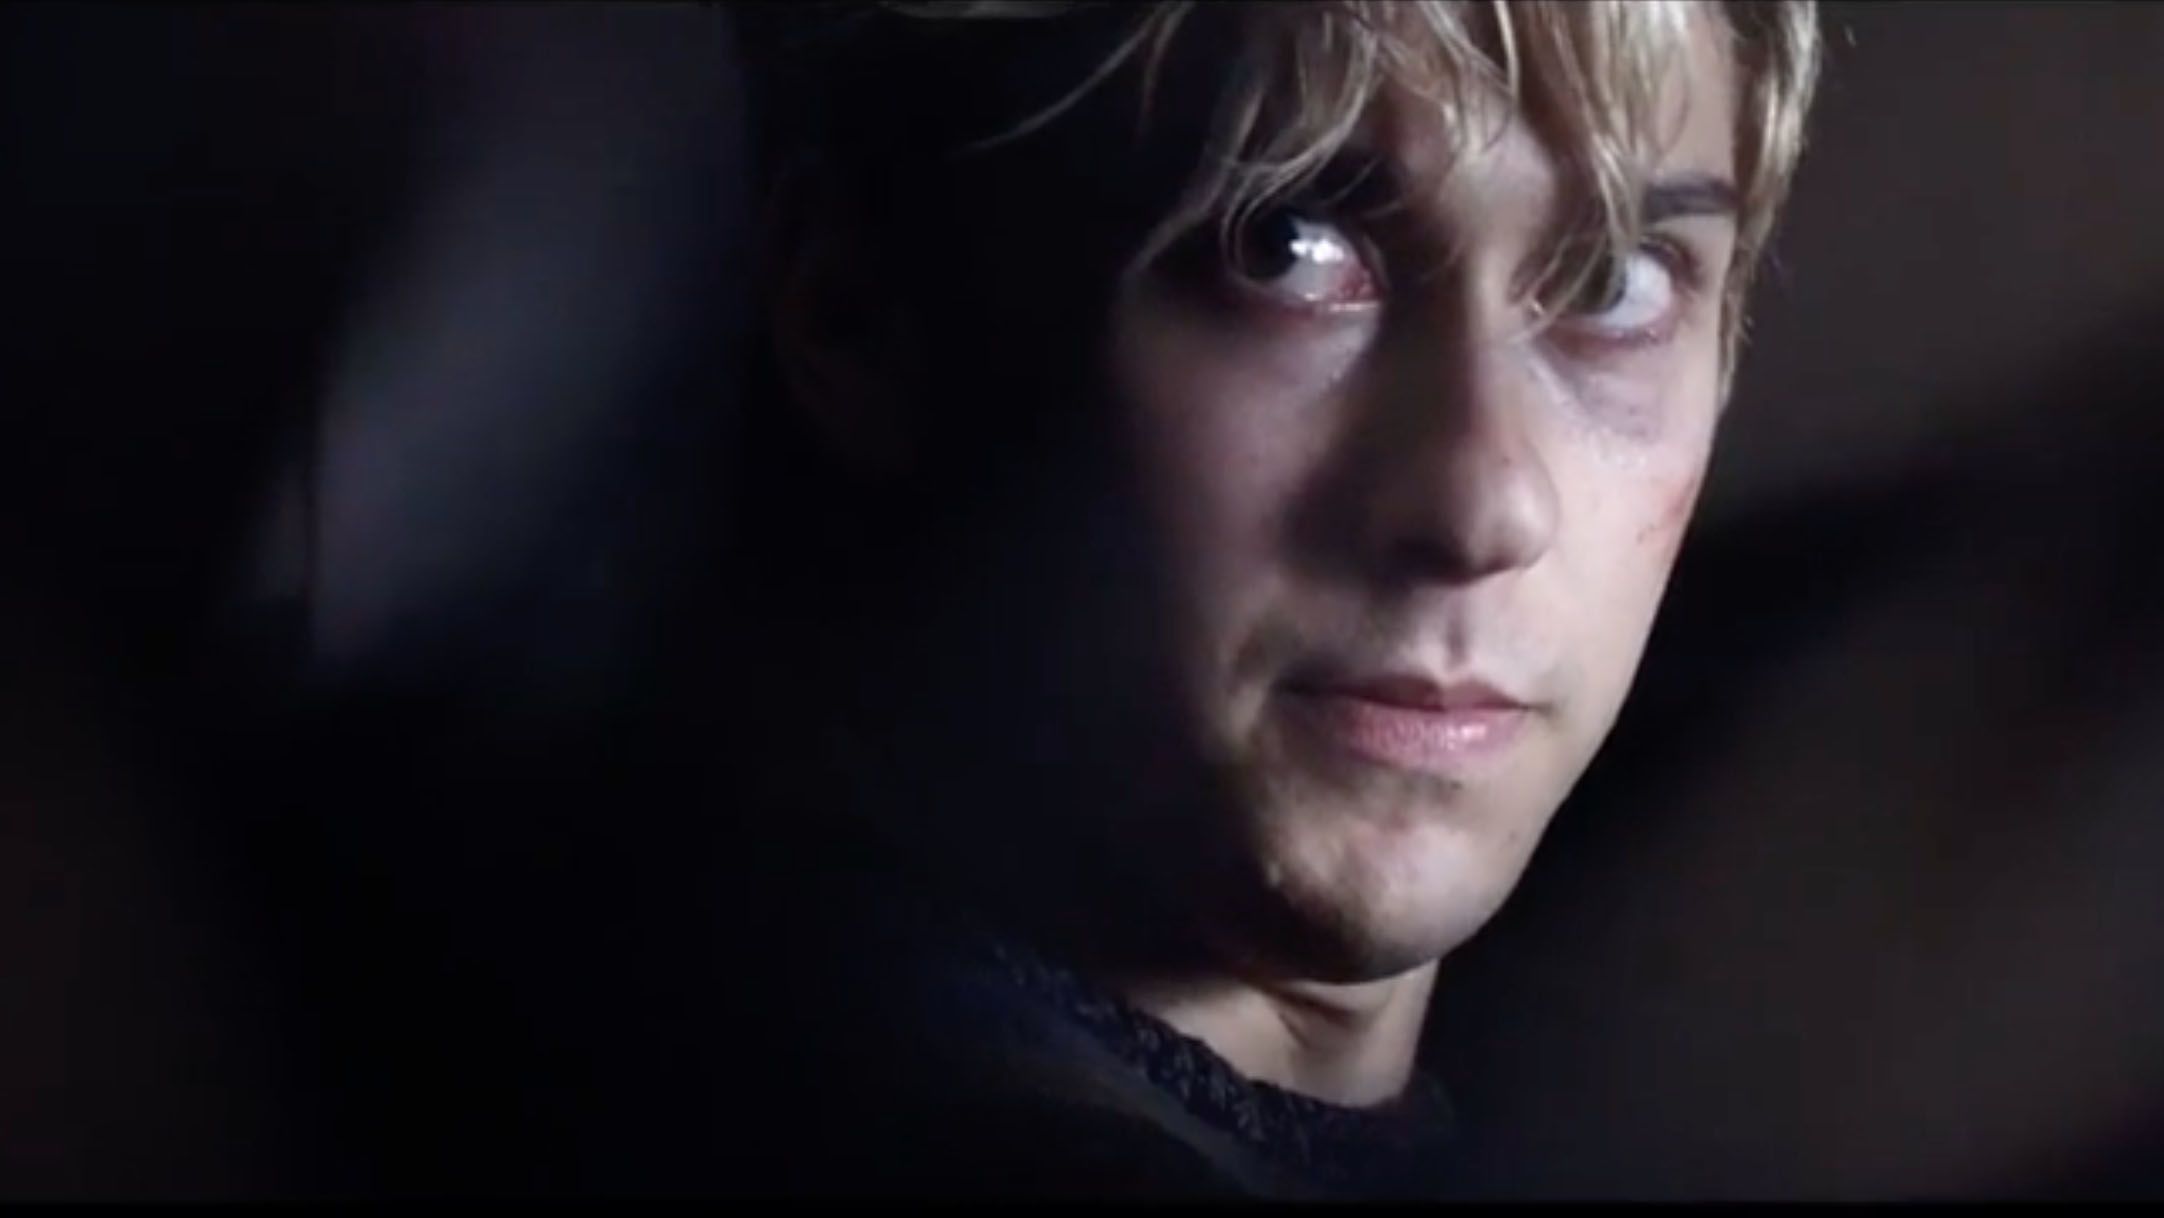 Death Note (live-action TV) - Anime News Network